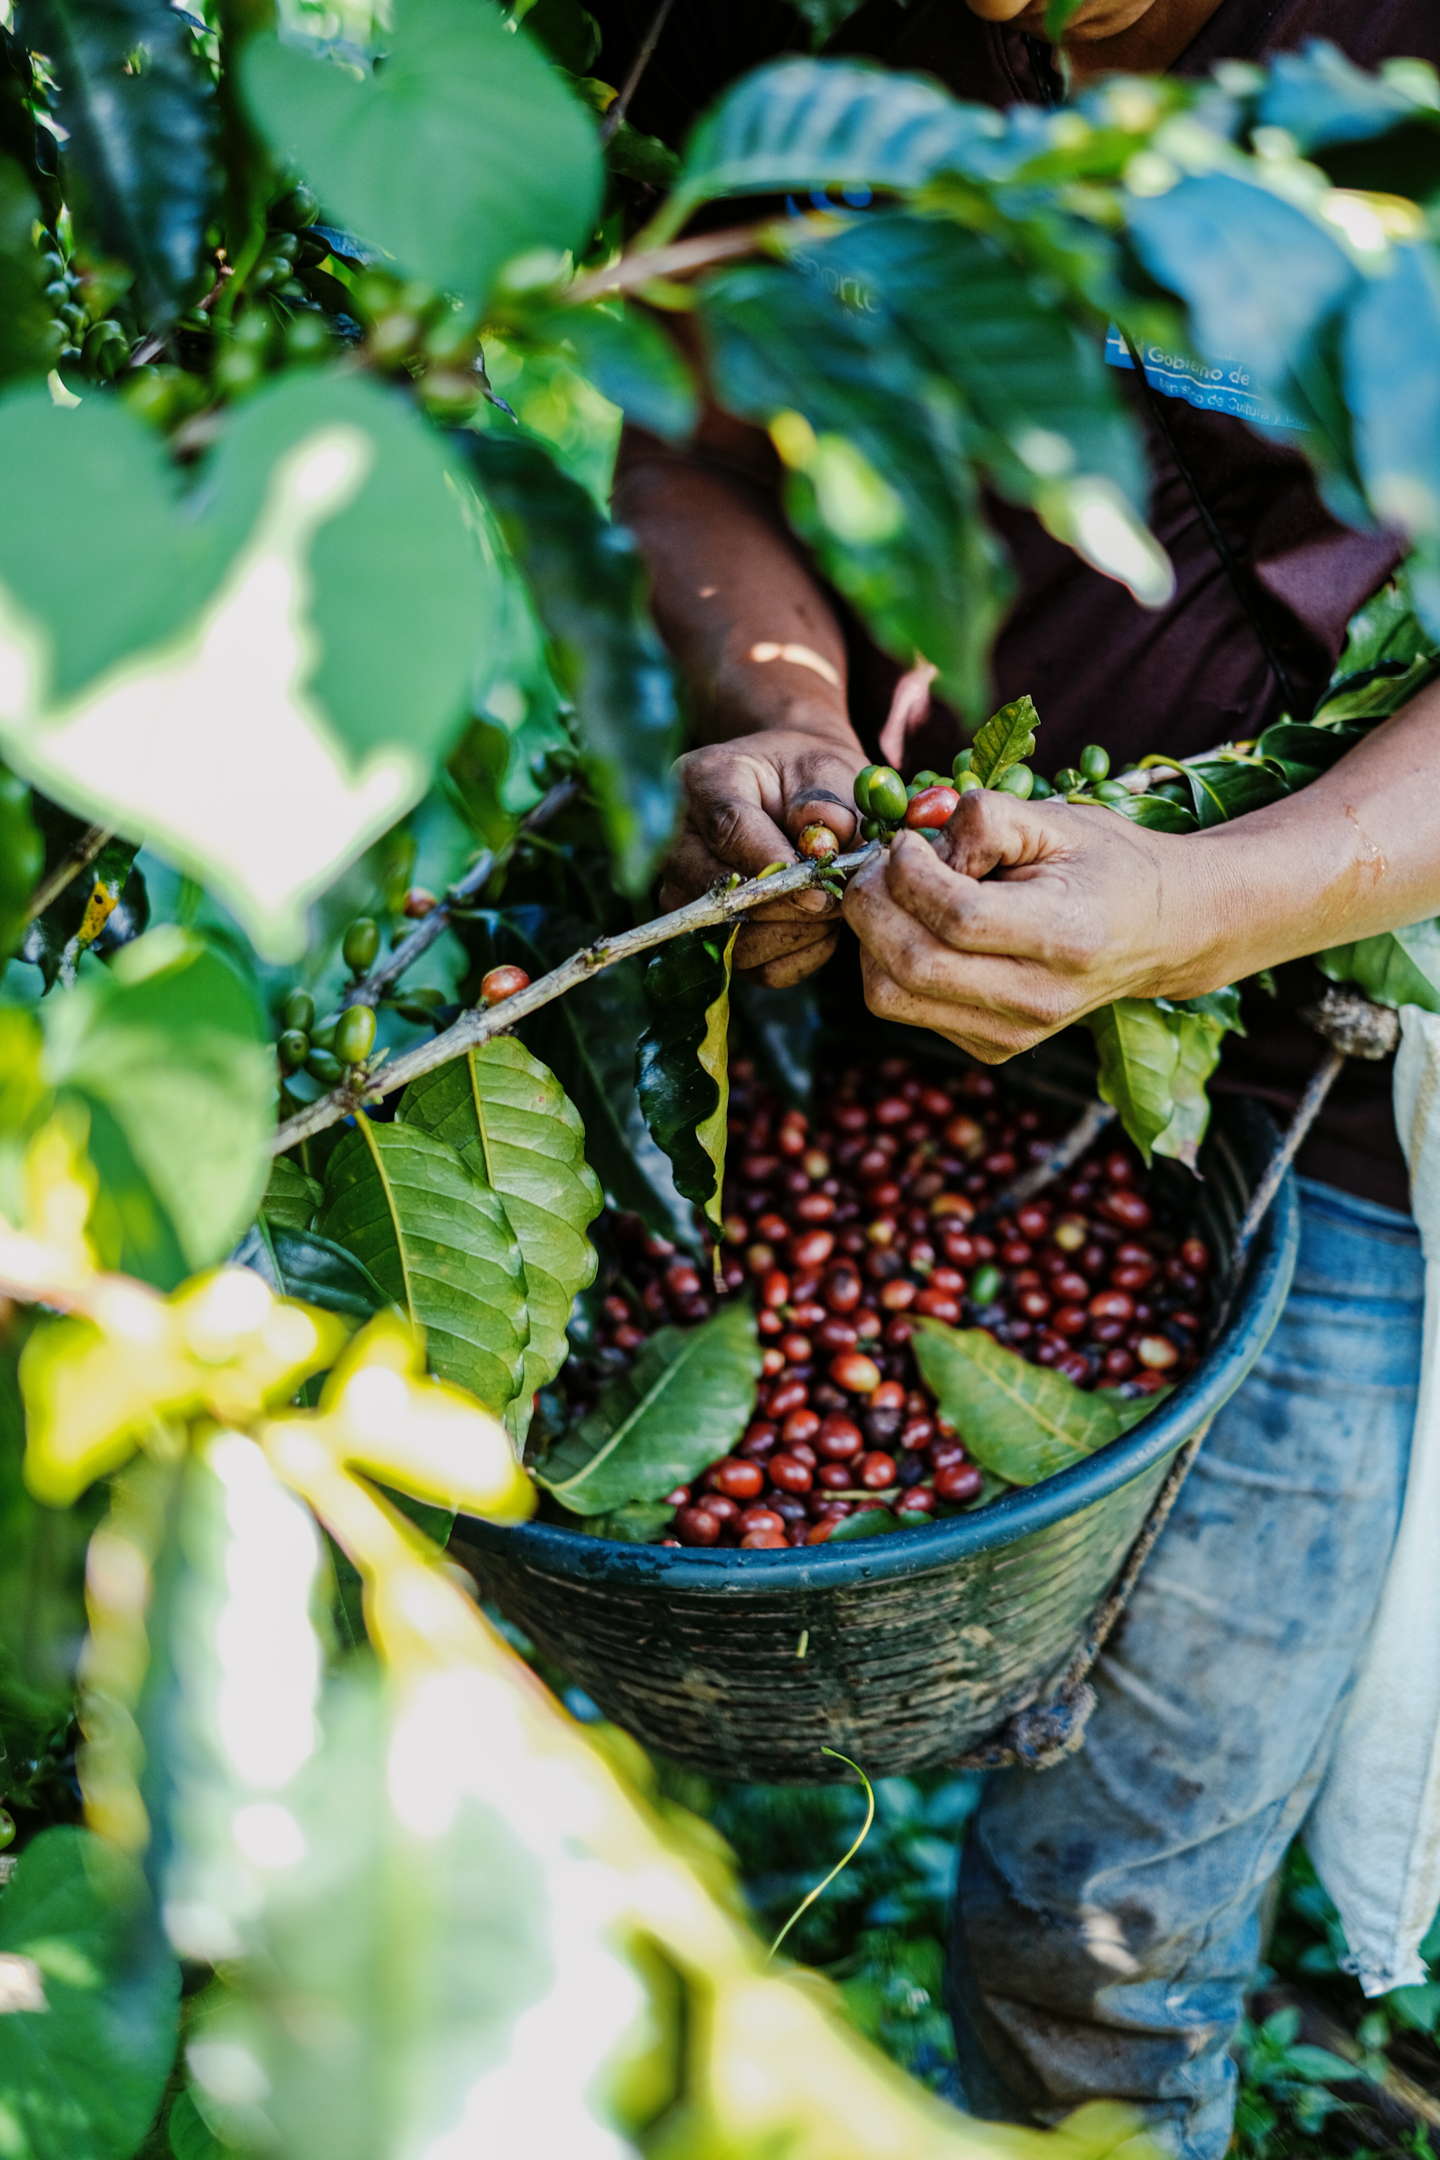 Man picking coffee cherries from the tree.